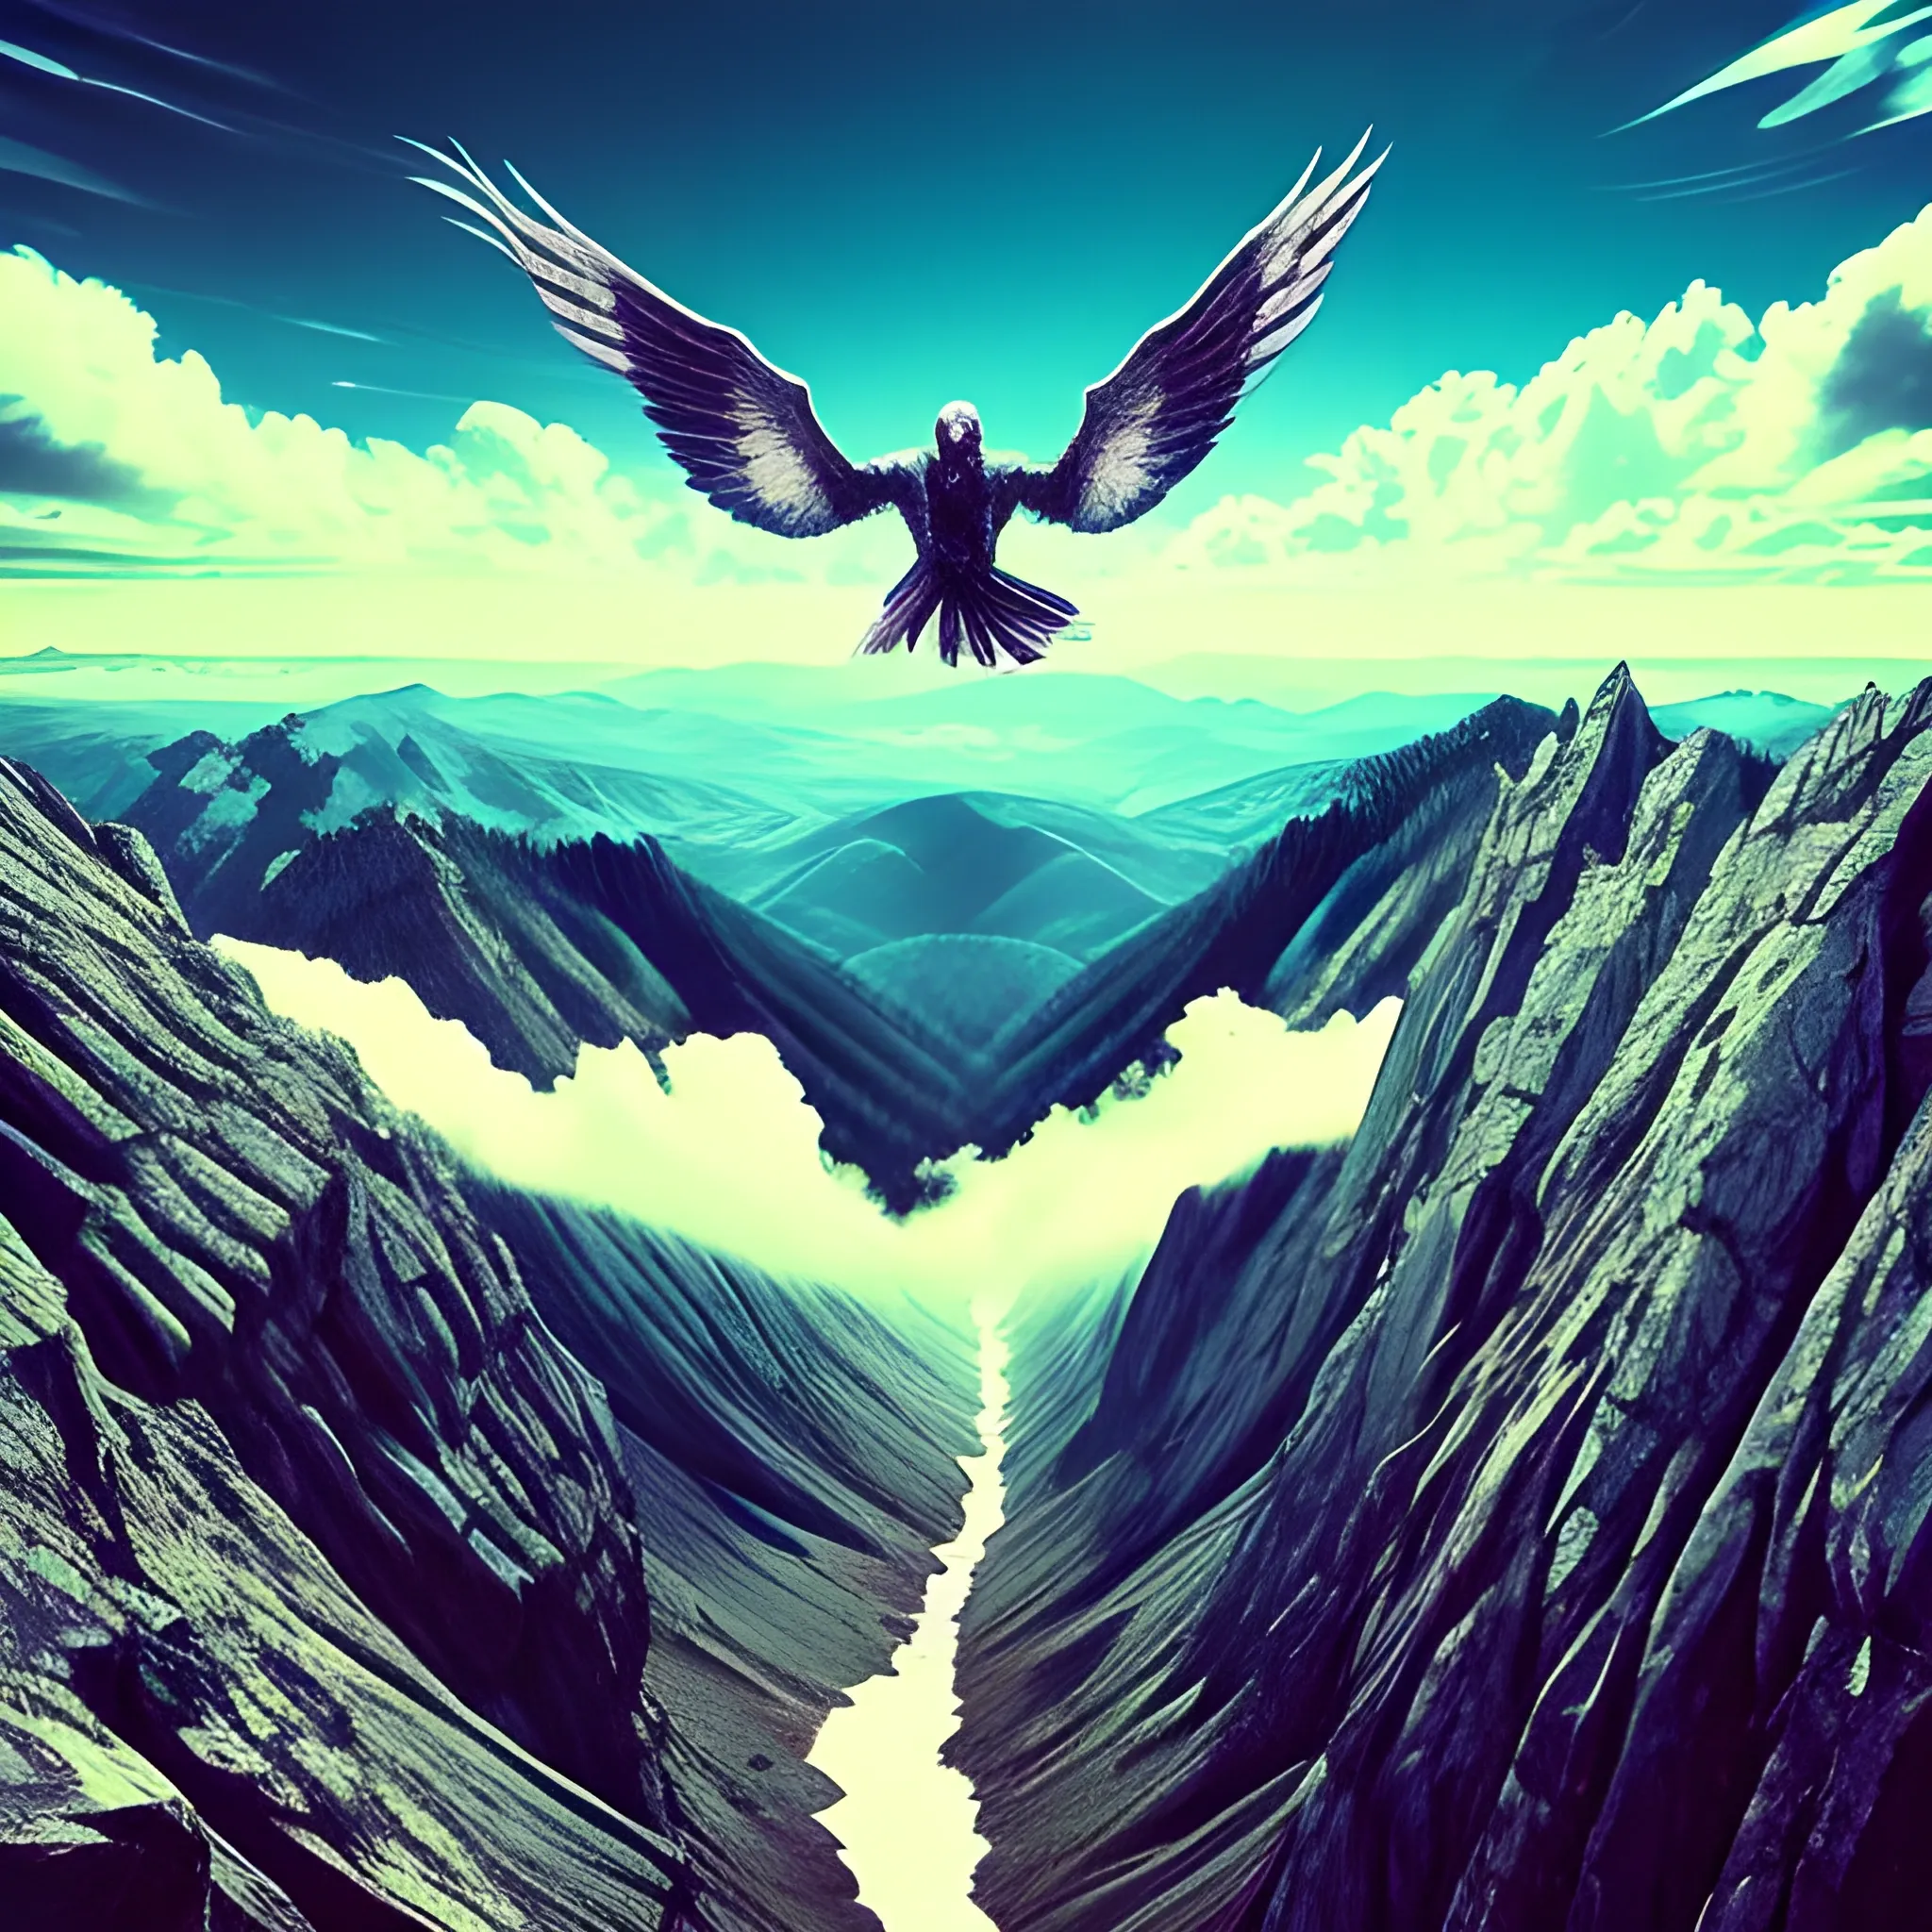 wings of bird man. mountin landscape,
athmospher, clouds, Trippy,